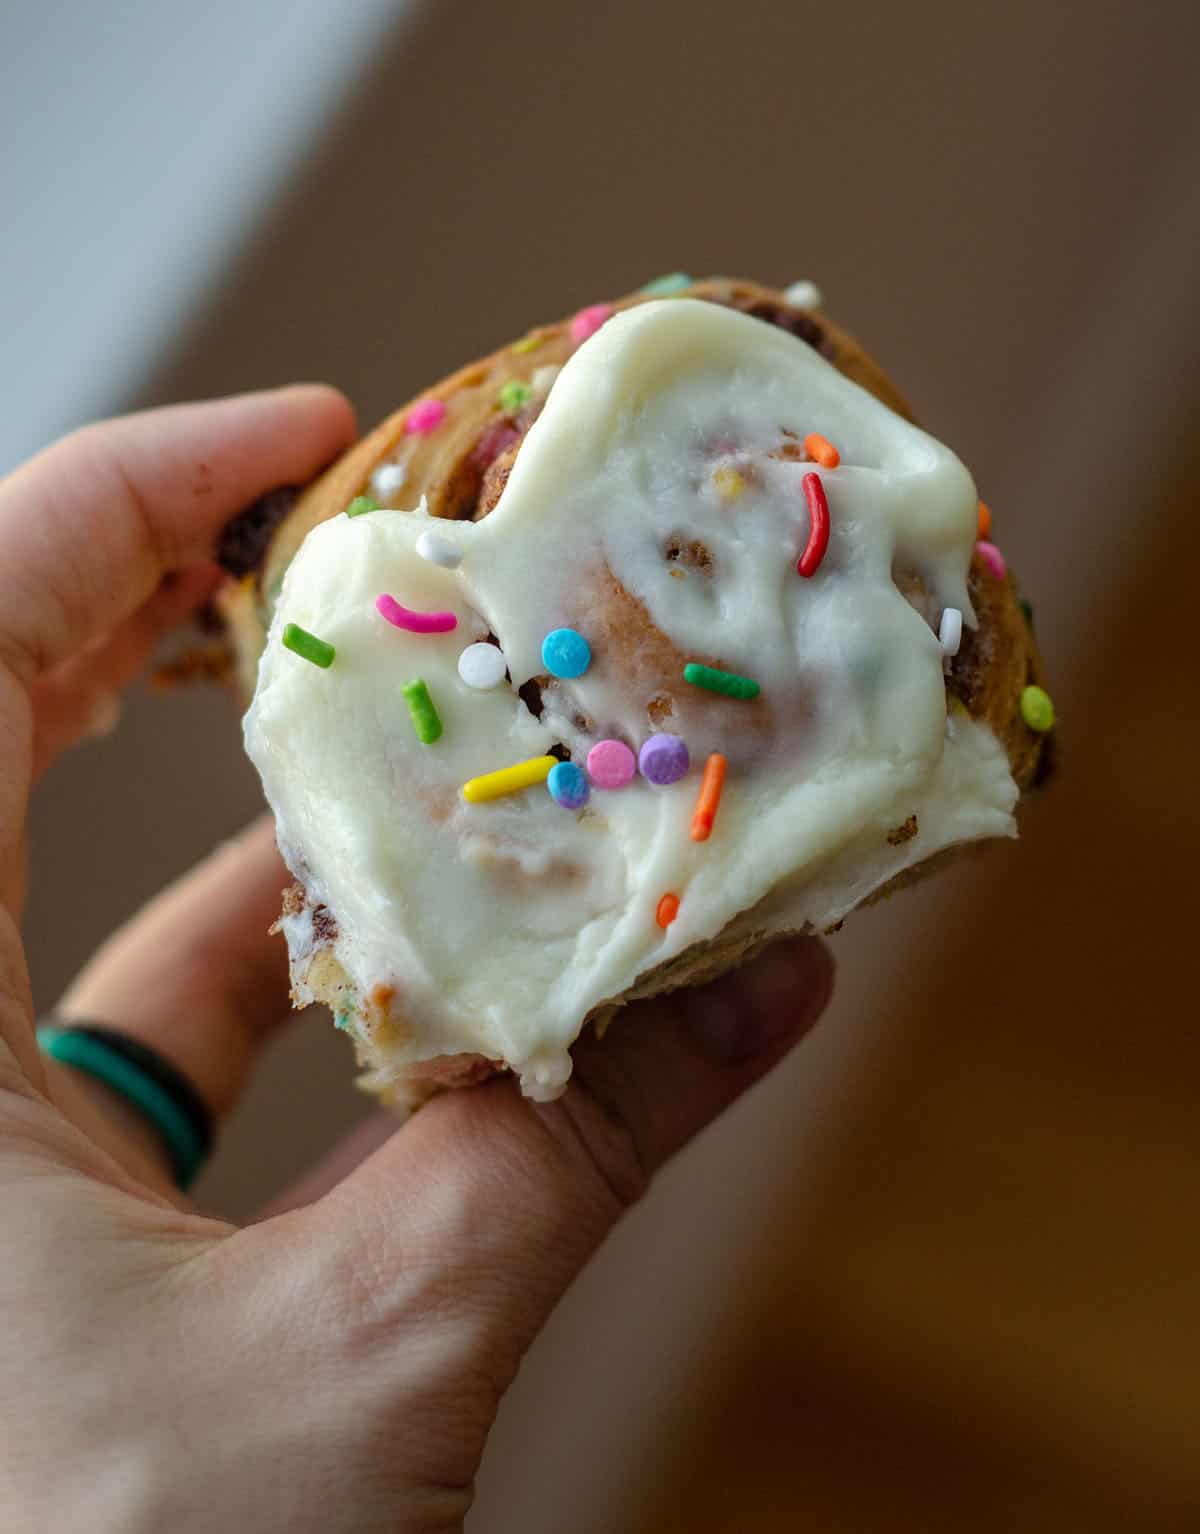 Simple yeast rolls filled with sweet and gooey cinnamon and studded with sprinkles. Spread with easy cream cheese frosting for an indulgent breakfast or treat! via @frshaprilflours